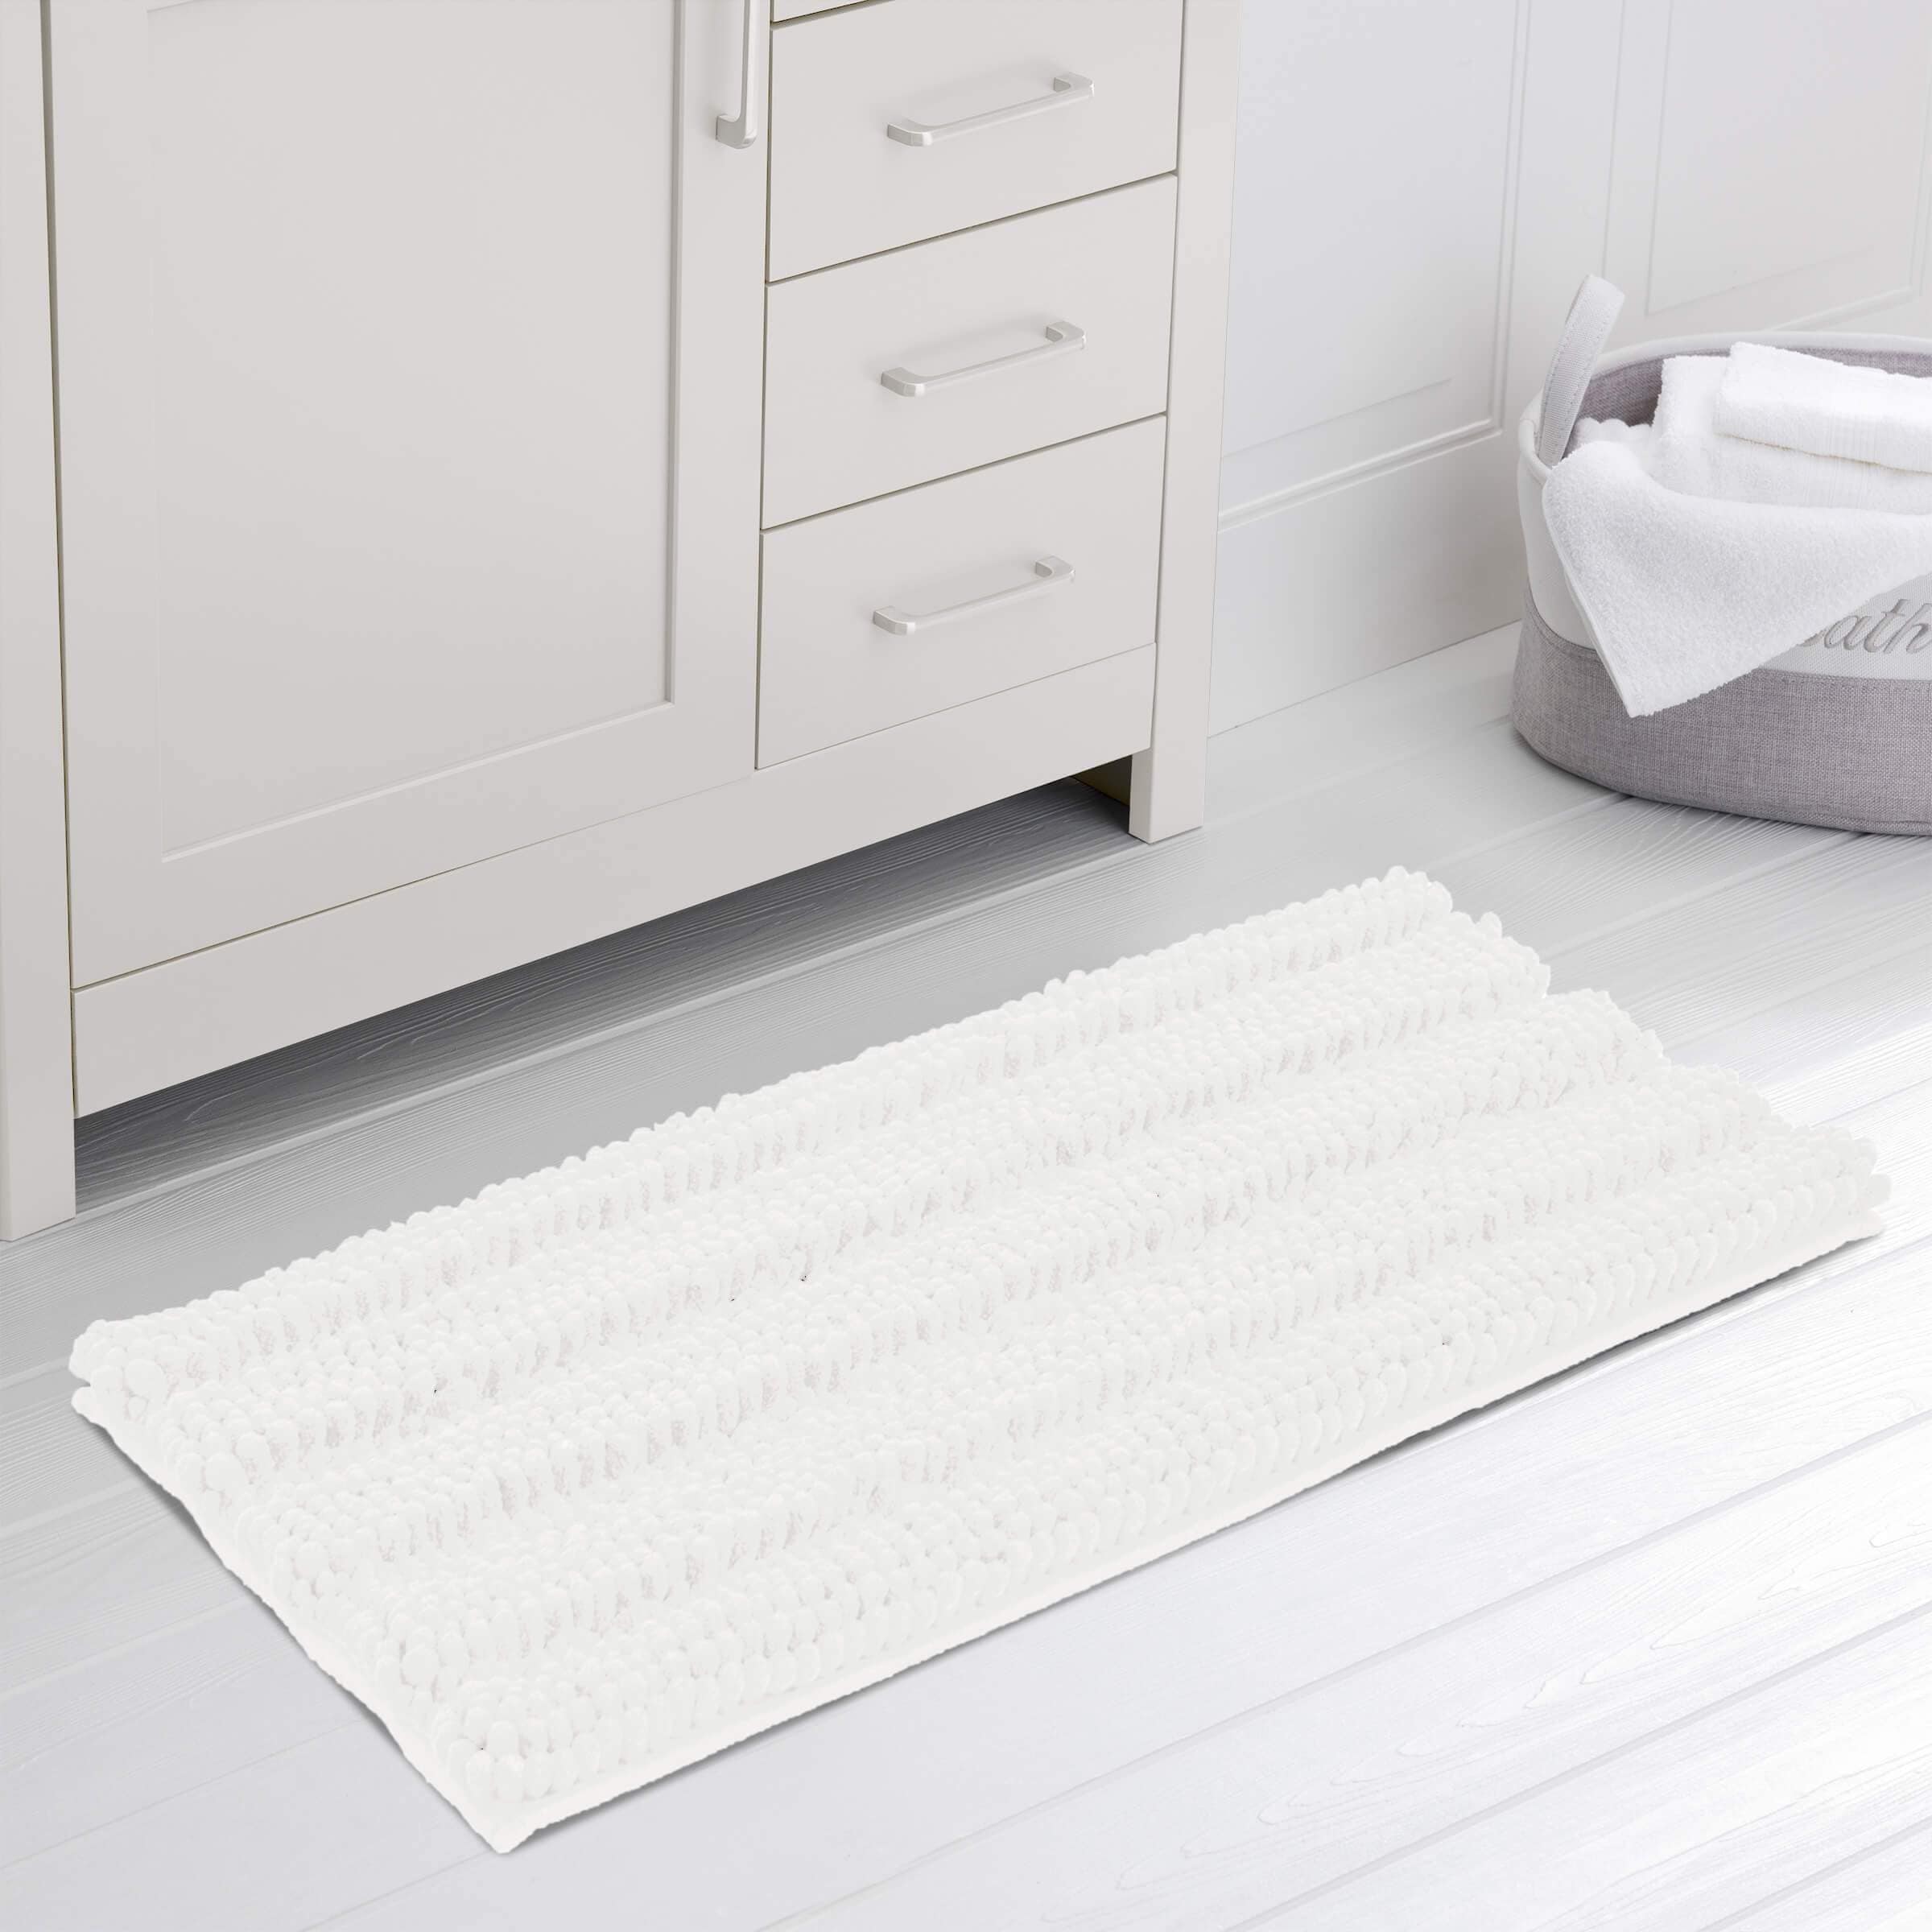 https://ak1.ostkcdn.com/images/products/is/images/direct/569560a1aa39928919b859b60970a357e2a6df3e/Subrtex-Supersoft-and-Absorbent-Braided-Bathroom-Rugs-Chenille-Bath-Rugs.jpg